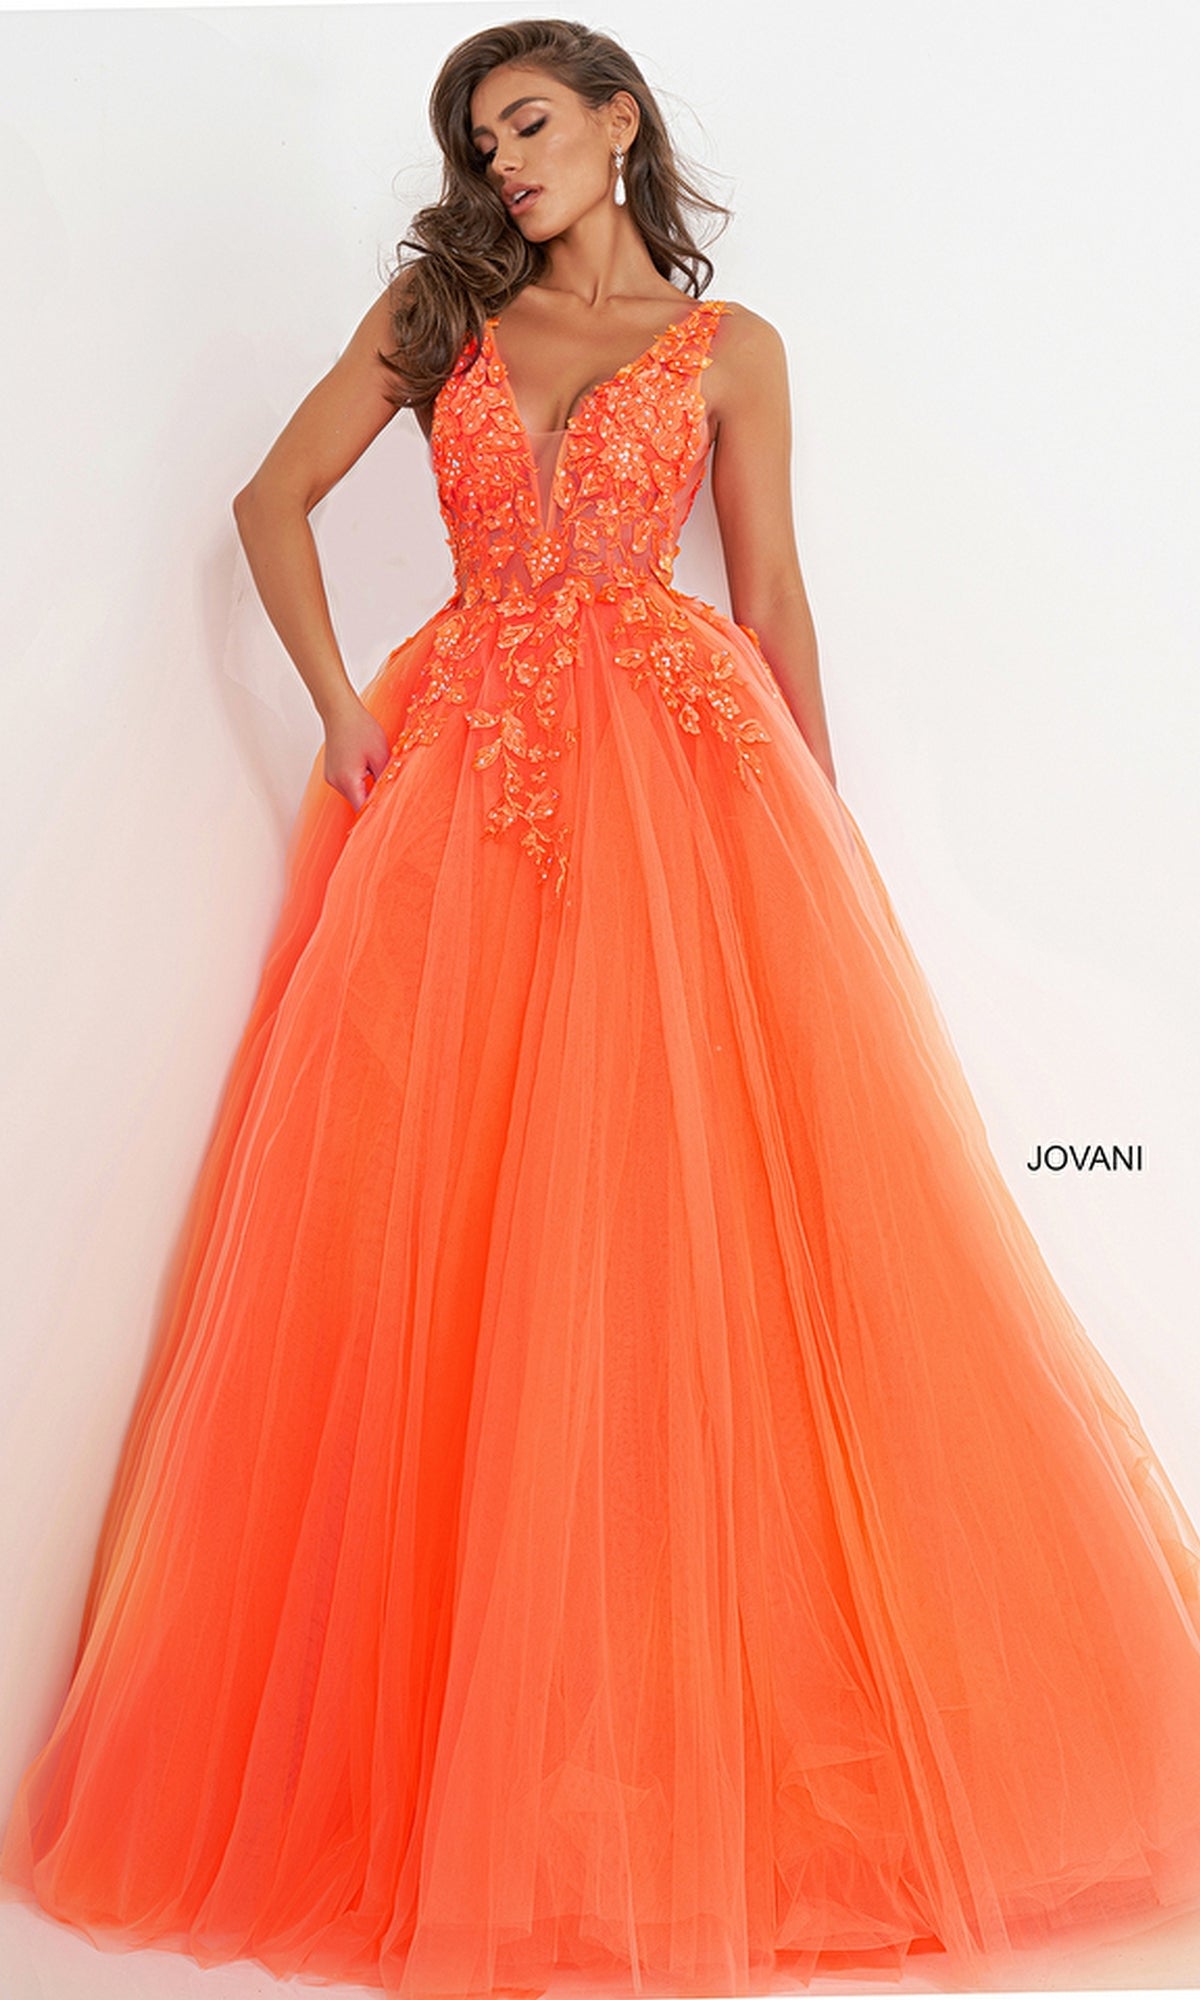 Jovani Sheer Prom Ball Gown with Floral Appliques